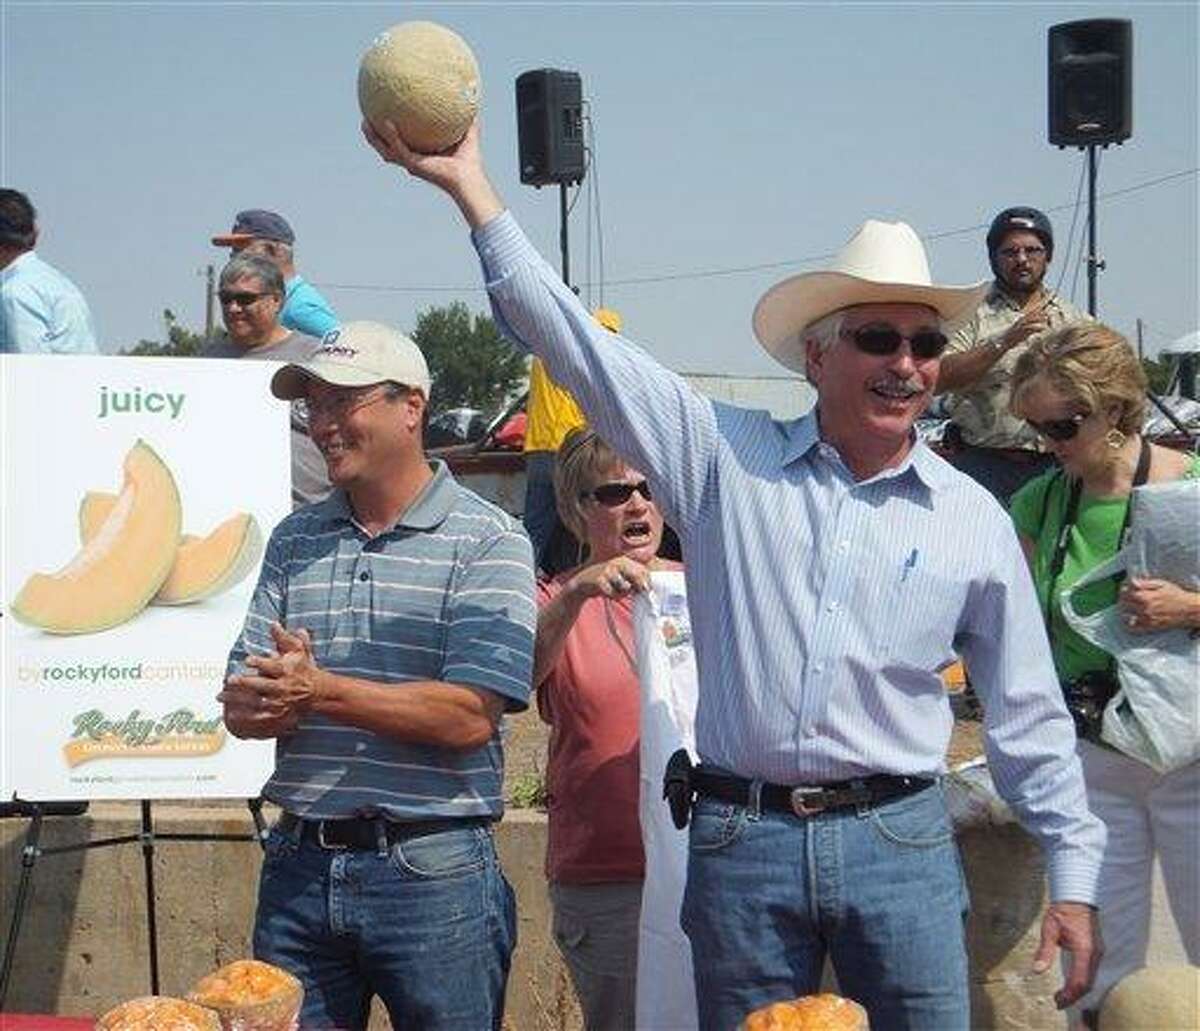 Colorado Agriculture Secretary John Salazar, right, holds up a Rocky Ford cantaloupe and declares it "the sweetest, best melon in the country" at the Arkansas Valley Fair in Rocky Ford, Colo., Saturday. A year after melons from southeast Colorado were the source of a nationwide listeria outbreak that killed 30 and sickened hundreds, growers in Rocky Ford have spent nearly $1 million in safety upgrades and say they're having a strong season with higher prices and strong demand. (AP Photo/Kristen Wyatt)